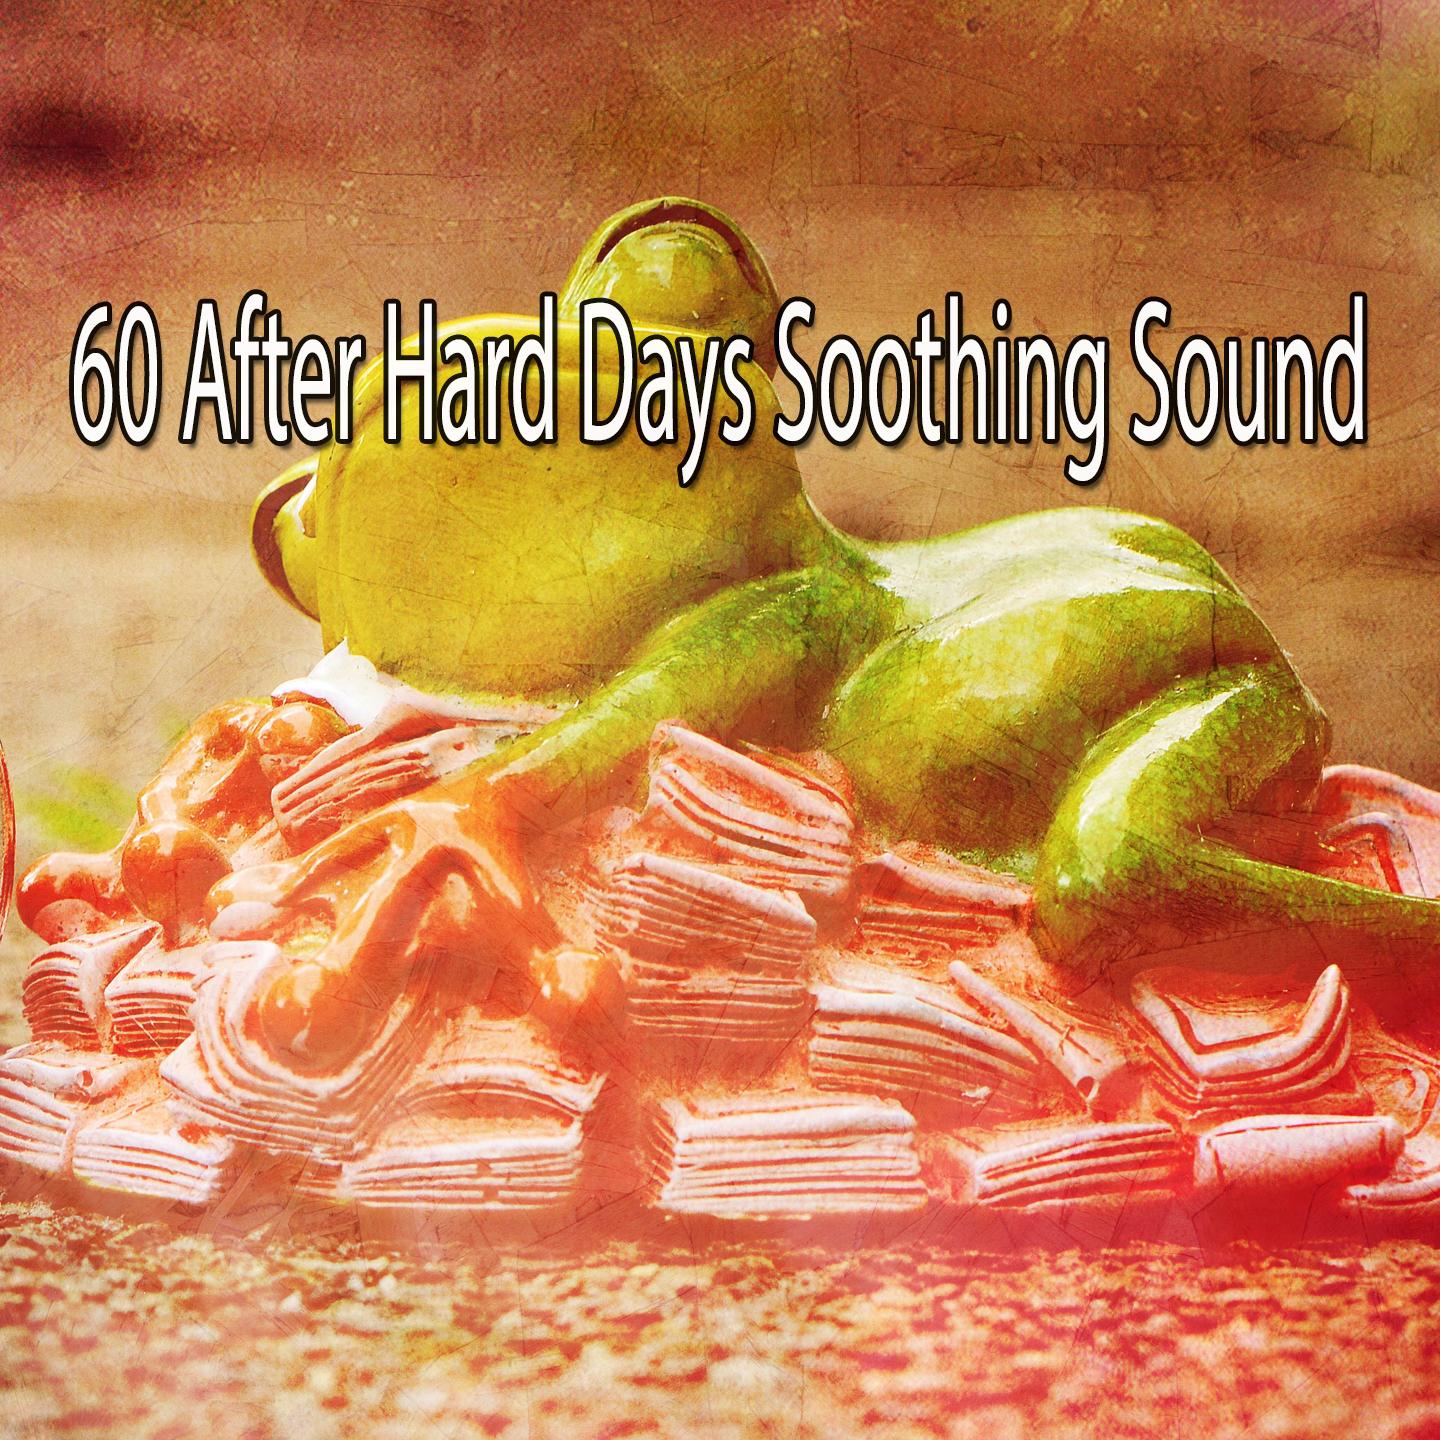 60 After Hard Days Soothing Sound